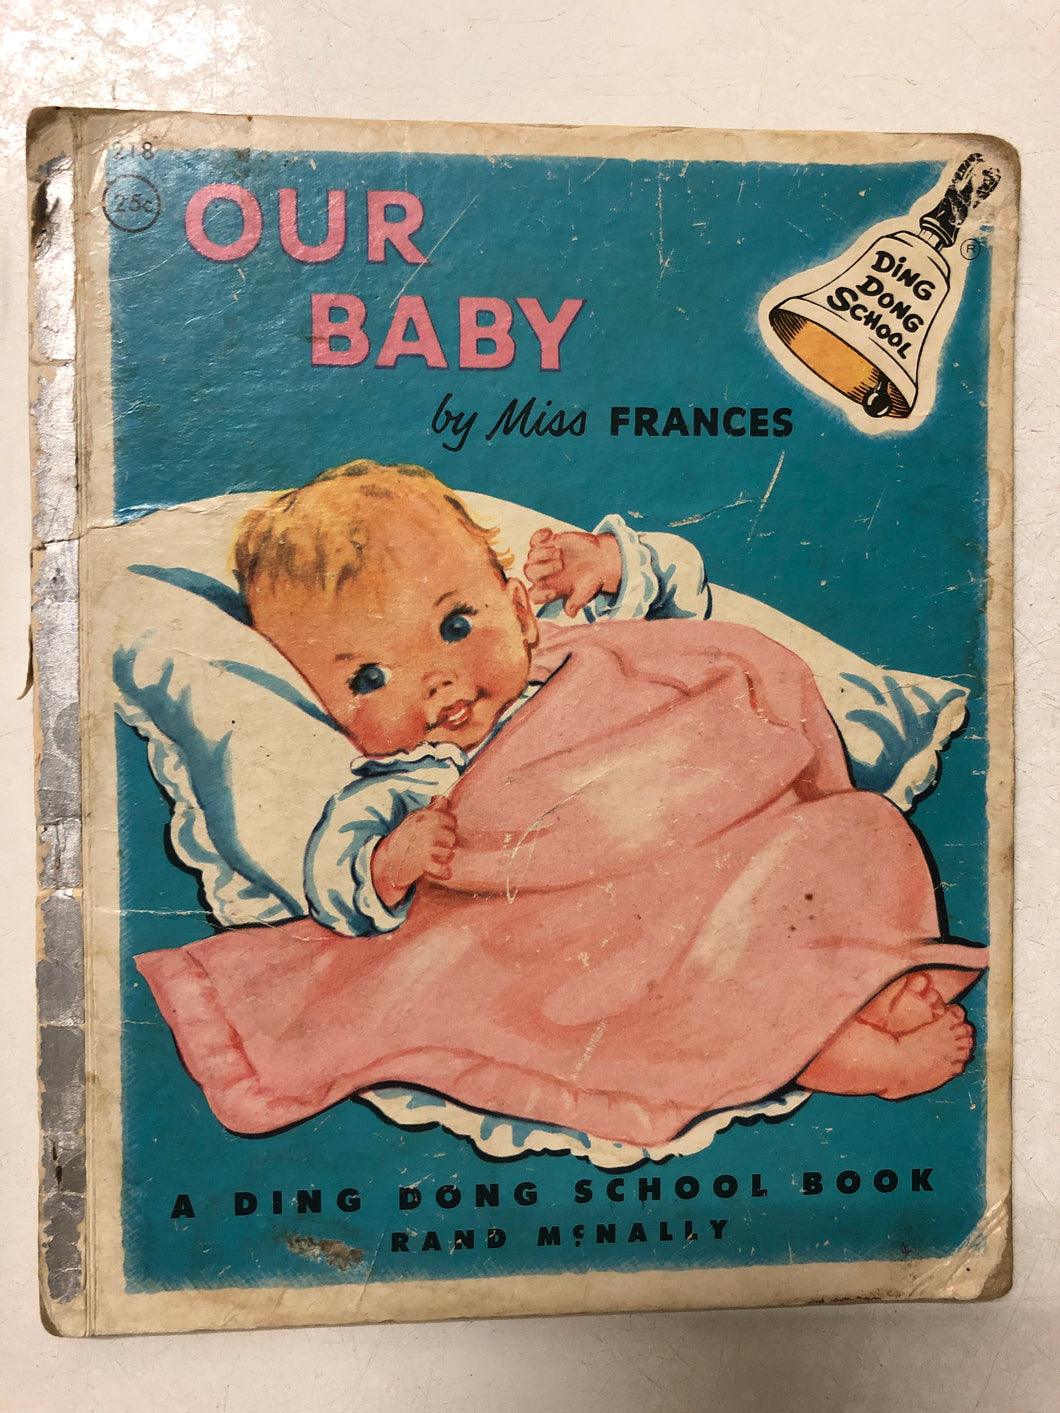 Our Baby - Slick Cat Books 